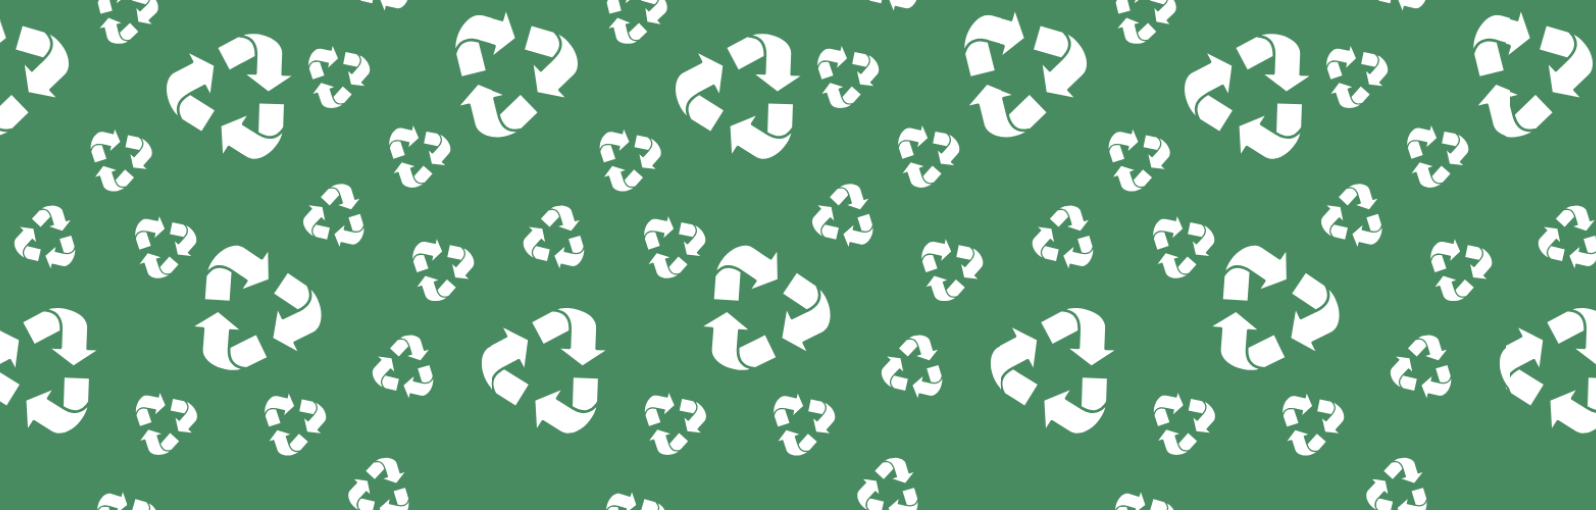 Recycling logos on a plain green background